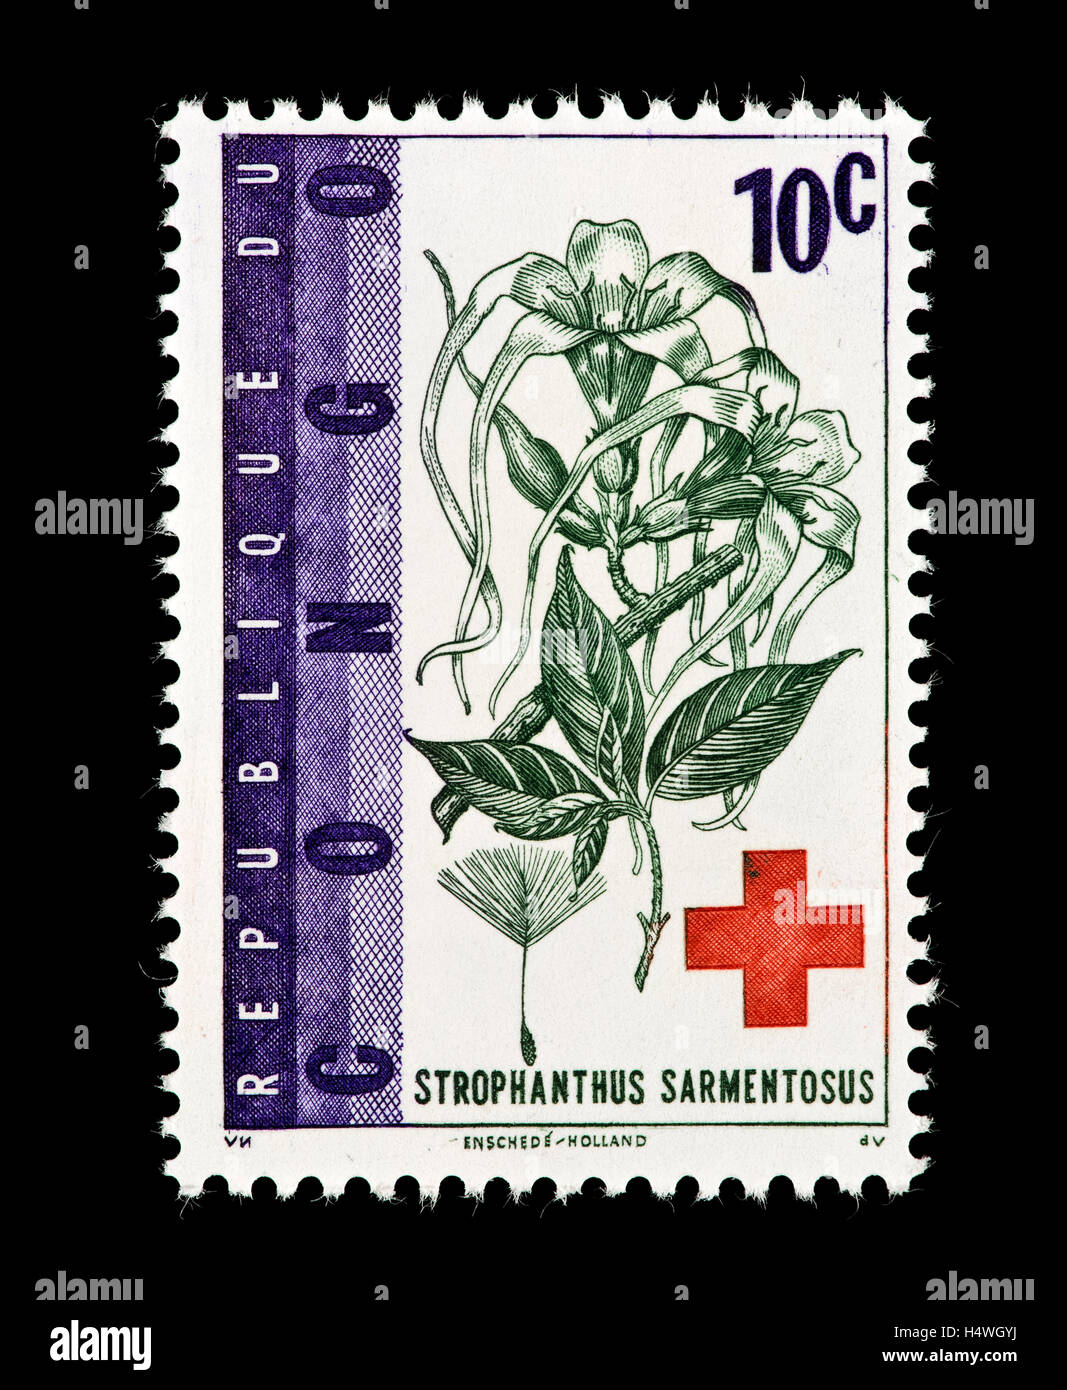 Postage stamp from Congo depicting Strophanthus sarmentosus, African medicinal plant. Stock Photo